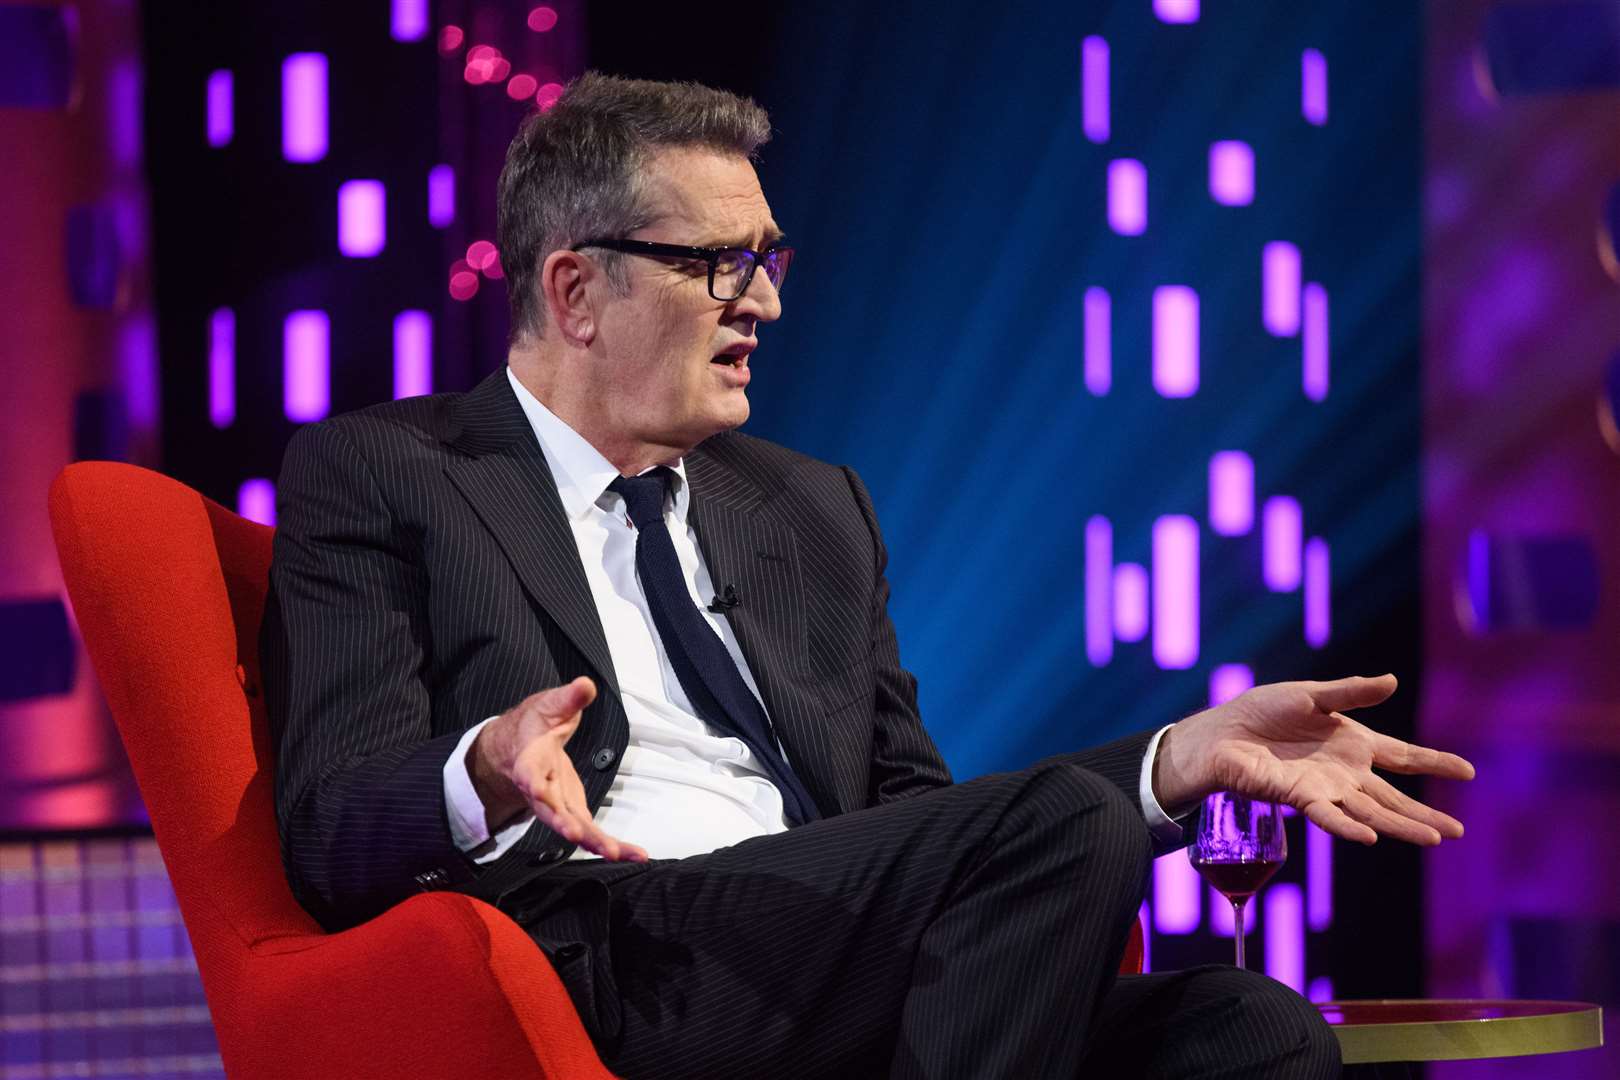 Rupert Everett agreed that the coverage from the relationship between the former ITV presenter and a younger male colleague was disproportionate (Matt Crossick/PA)